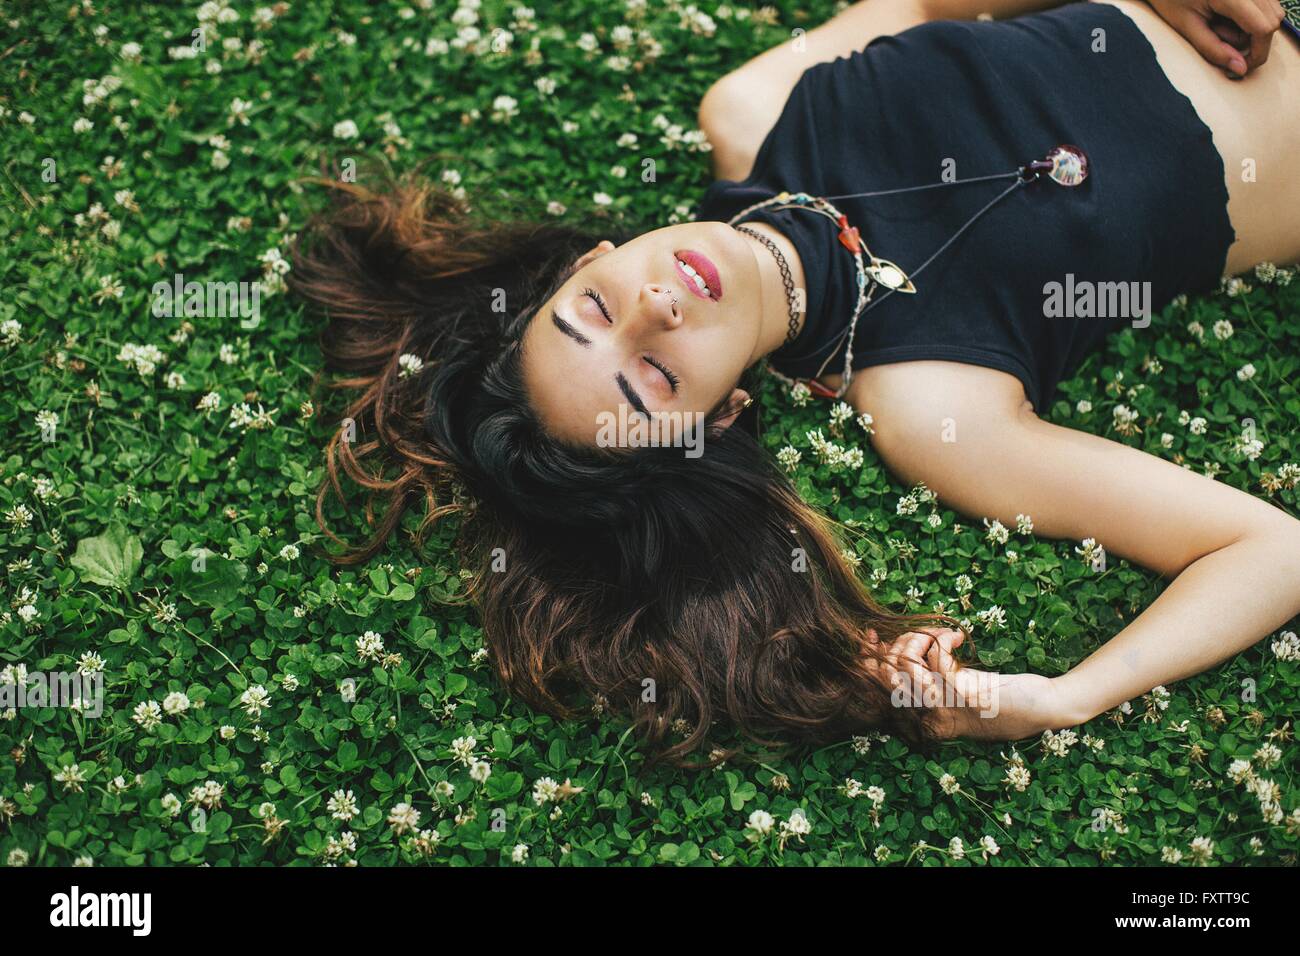 High angle view of woman with nose ring lying on clover covered grass, eyes closed Stock Photo